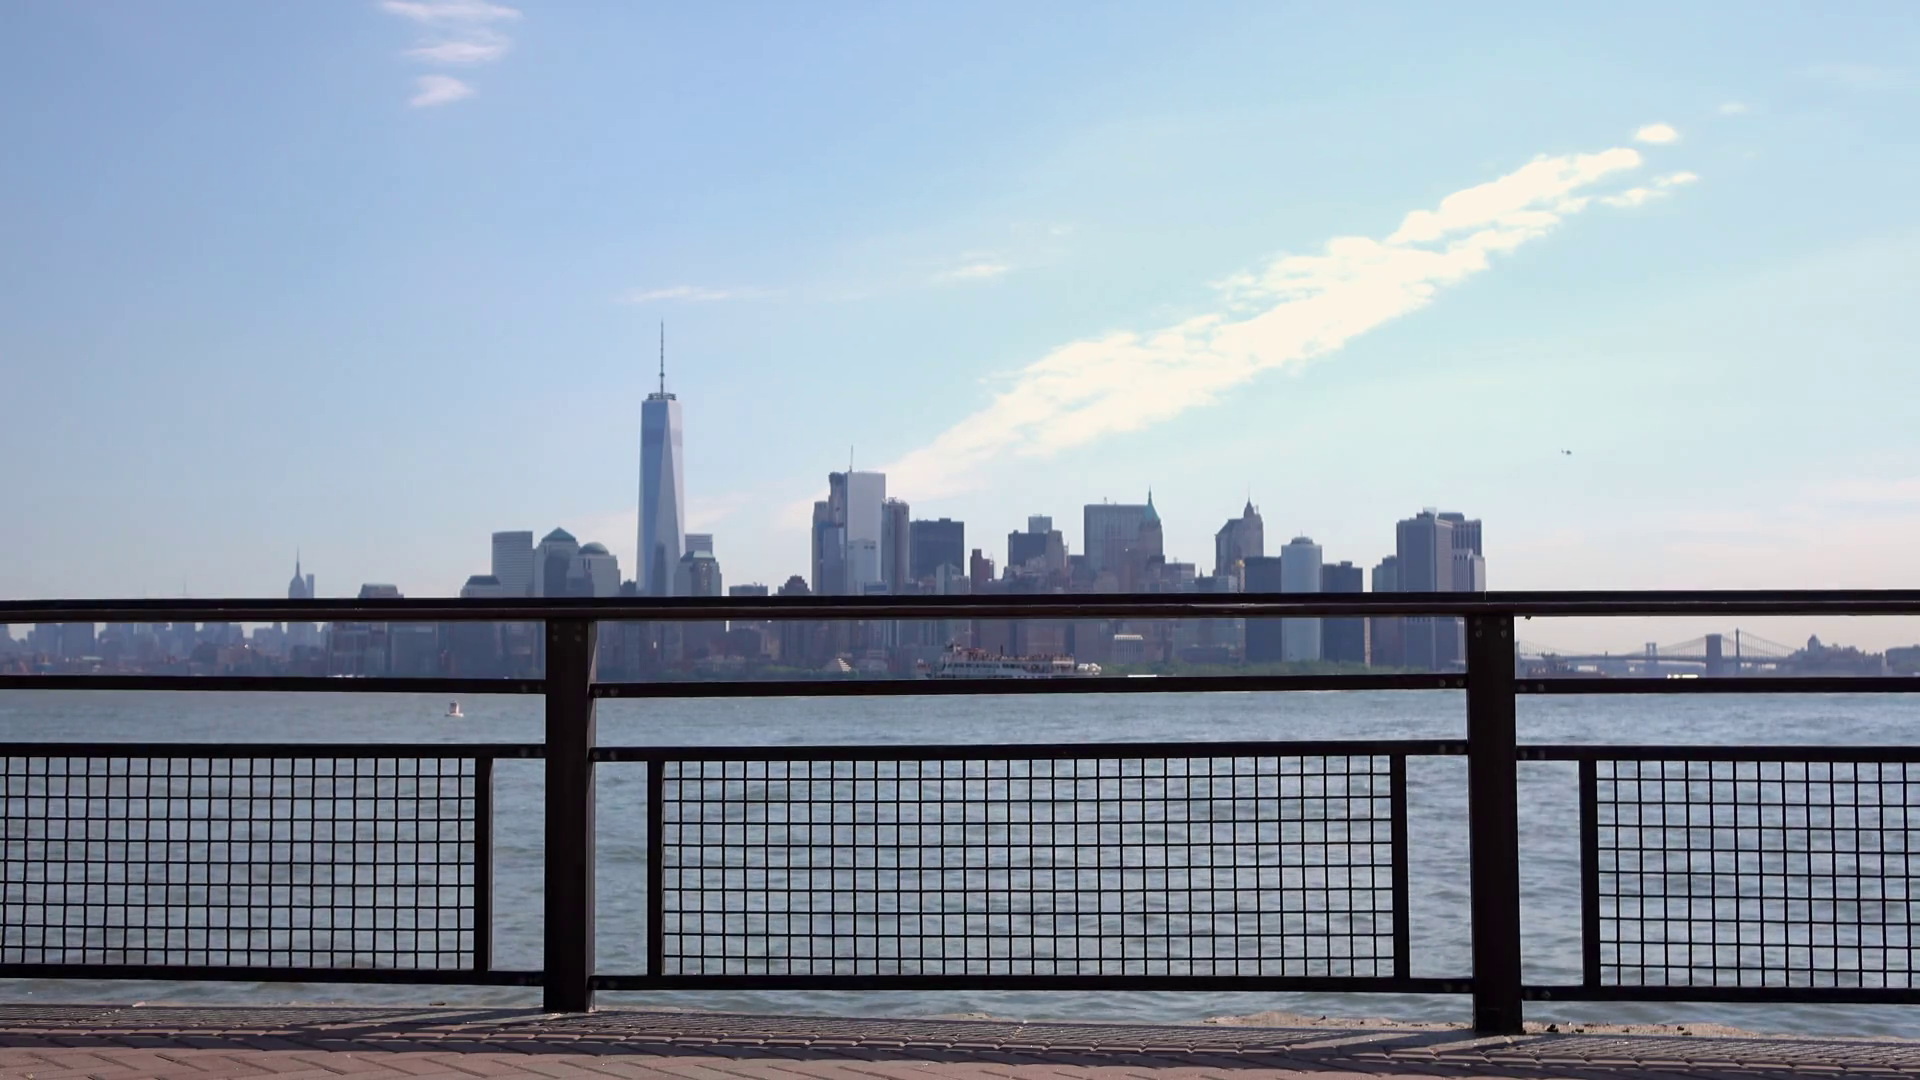 New York City In Background With Focus On Fence Along Water Edge